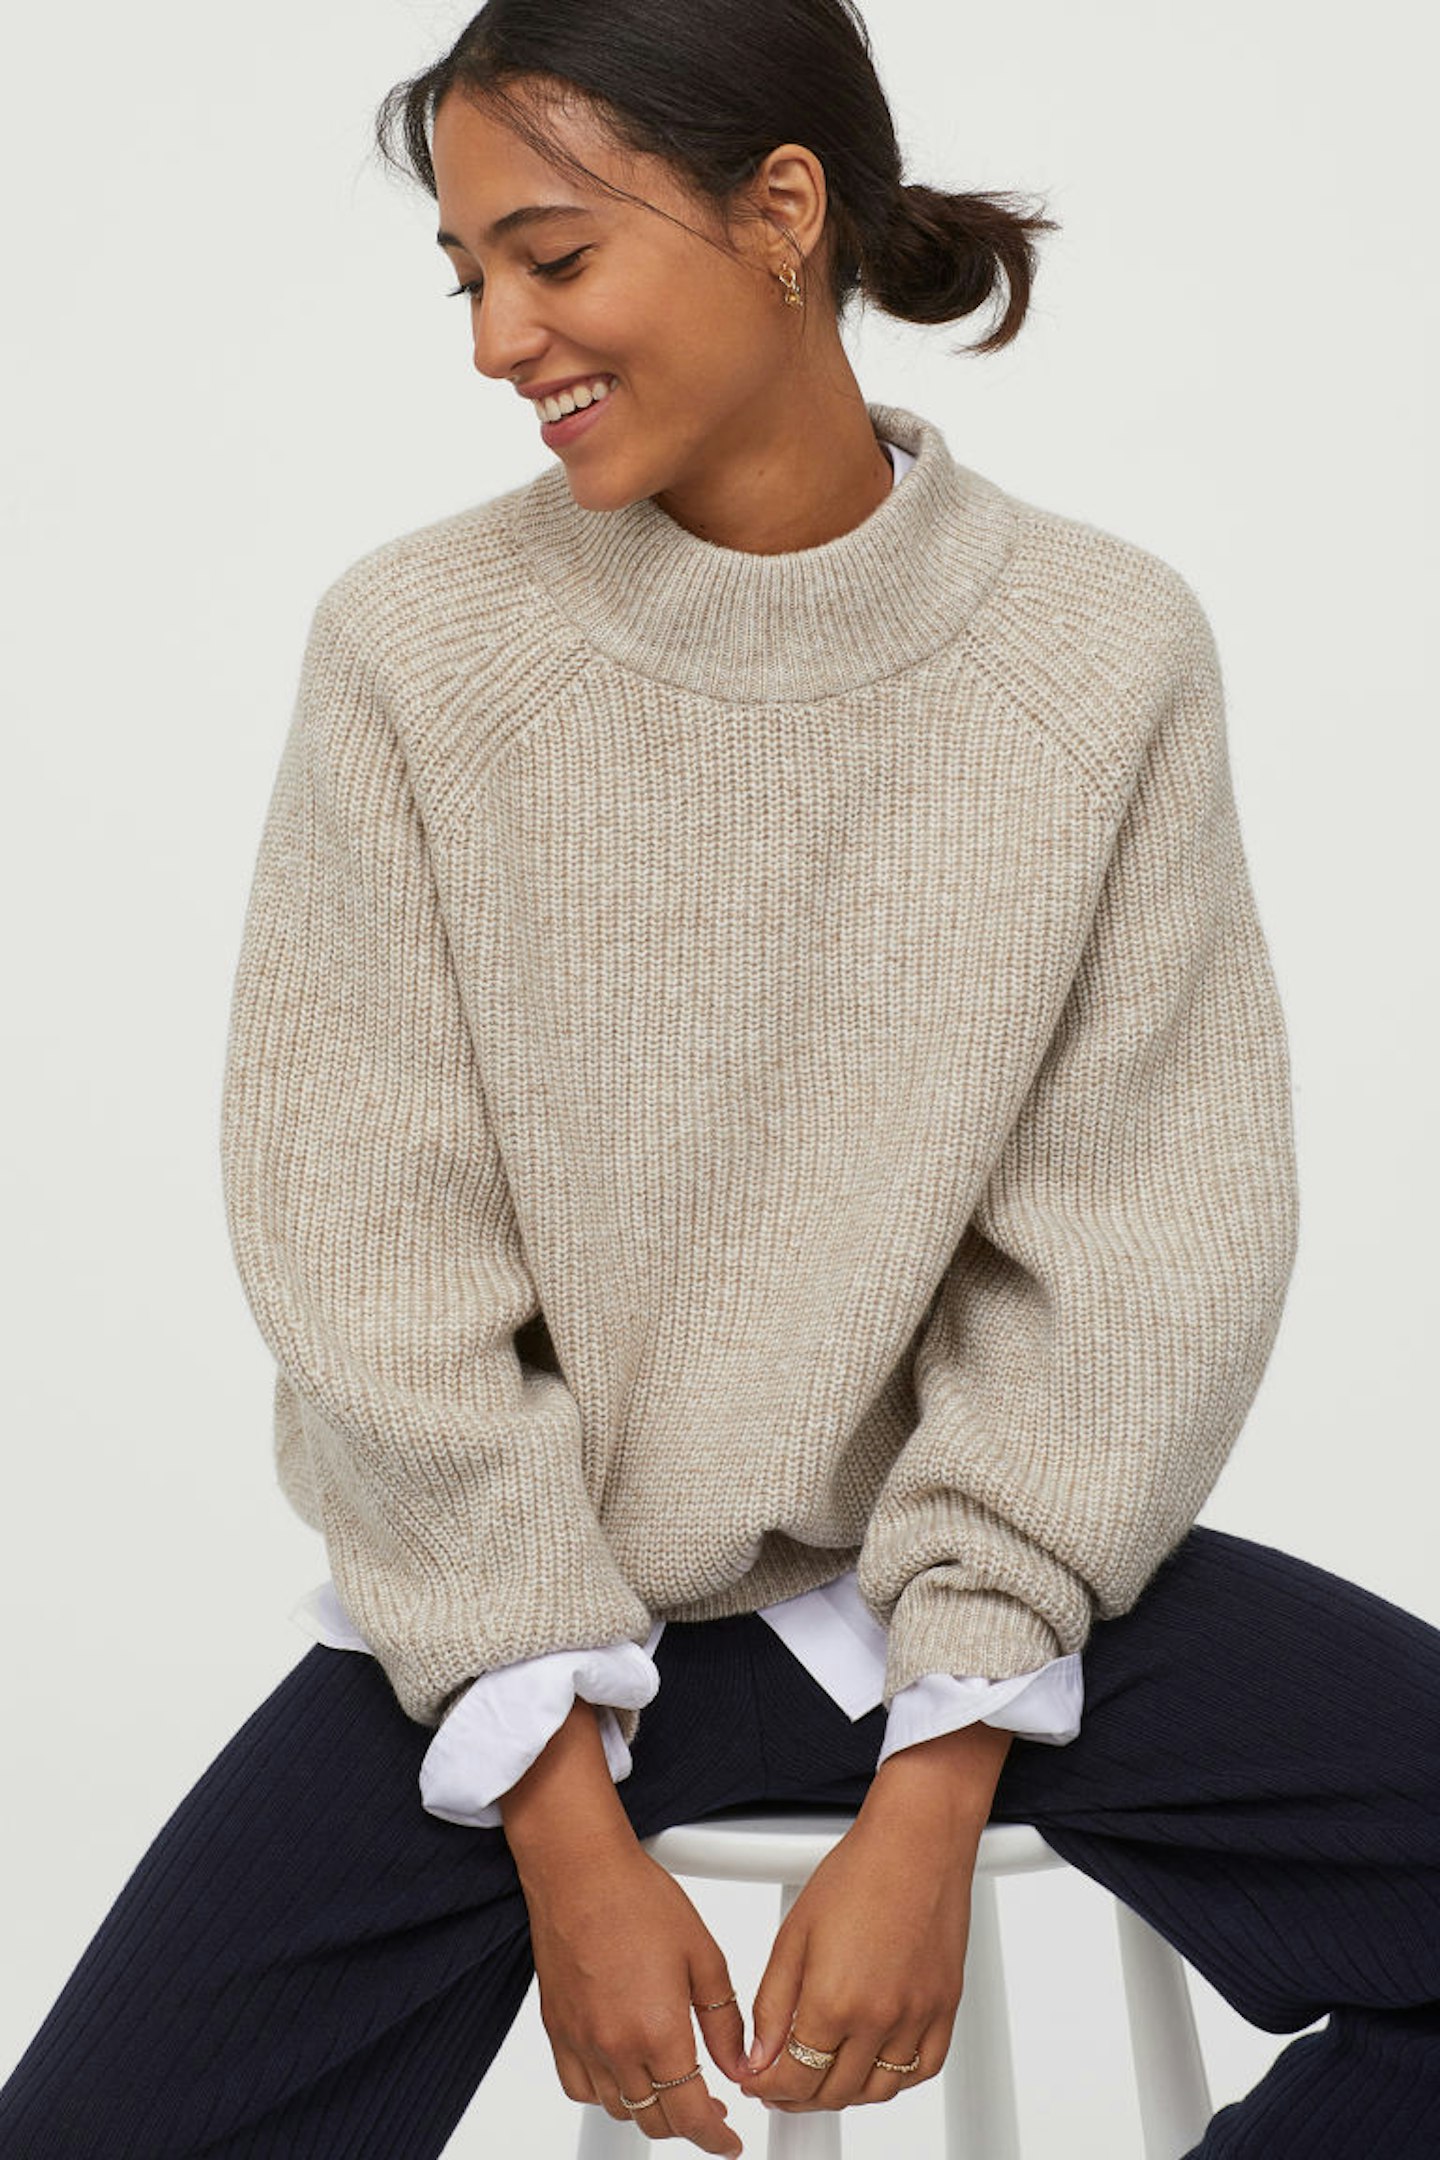 H&M Conscious, Knitted Jumper, £24.99